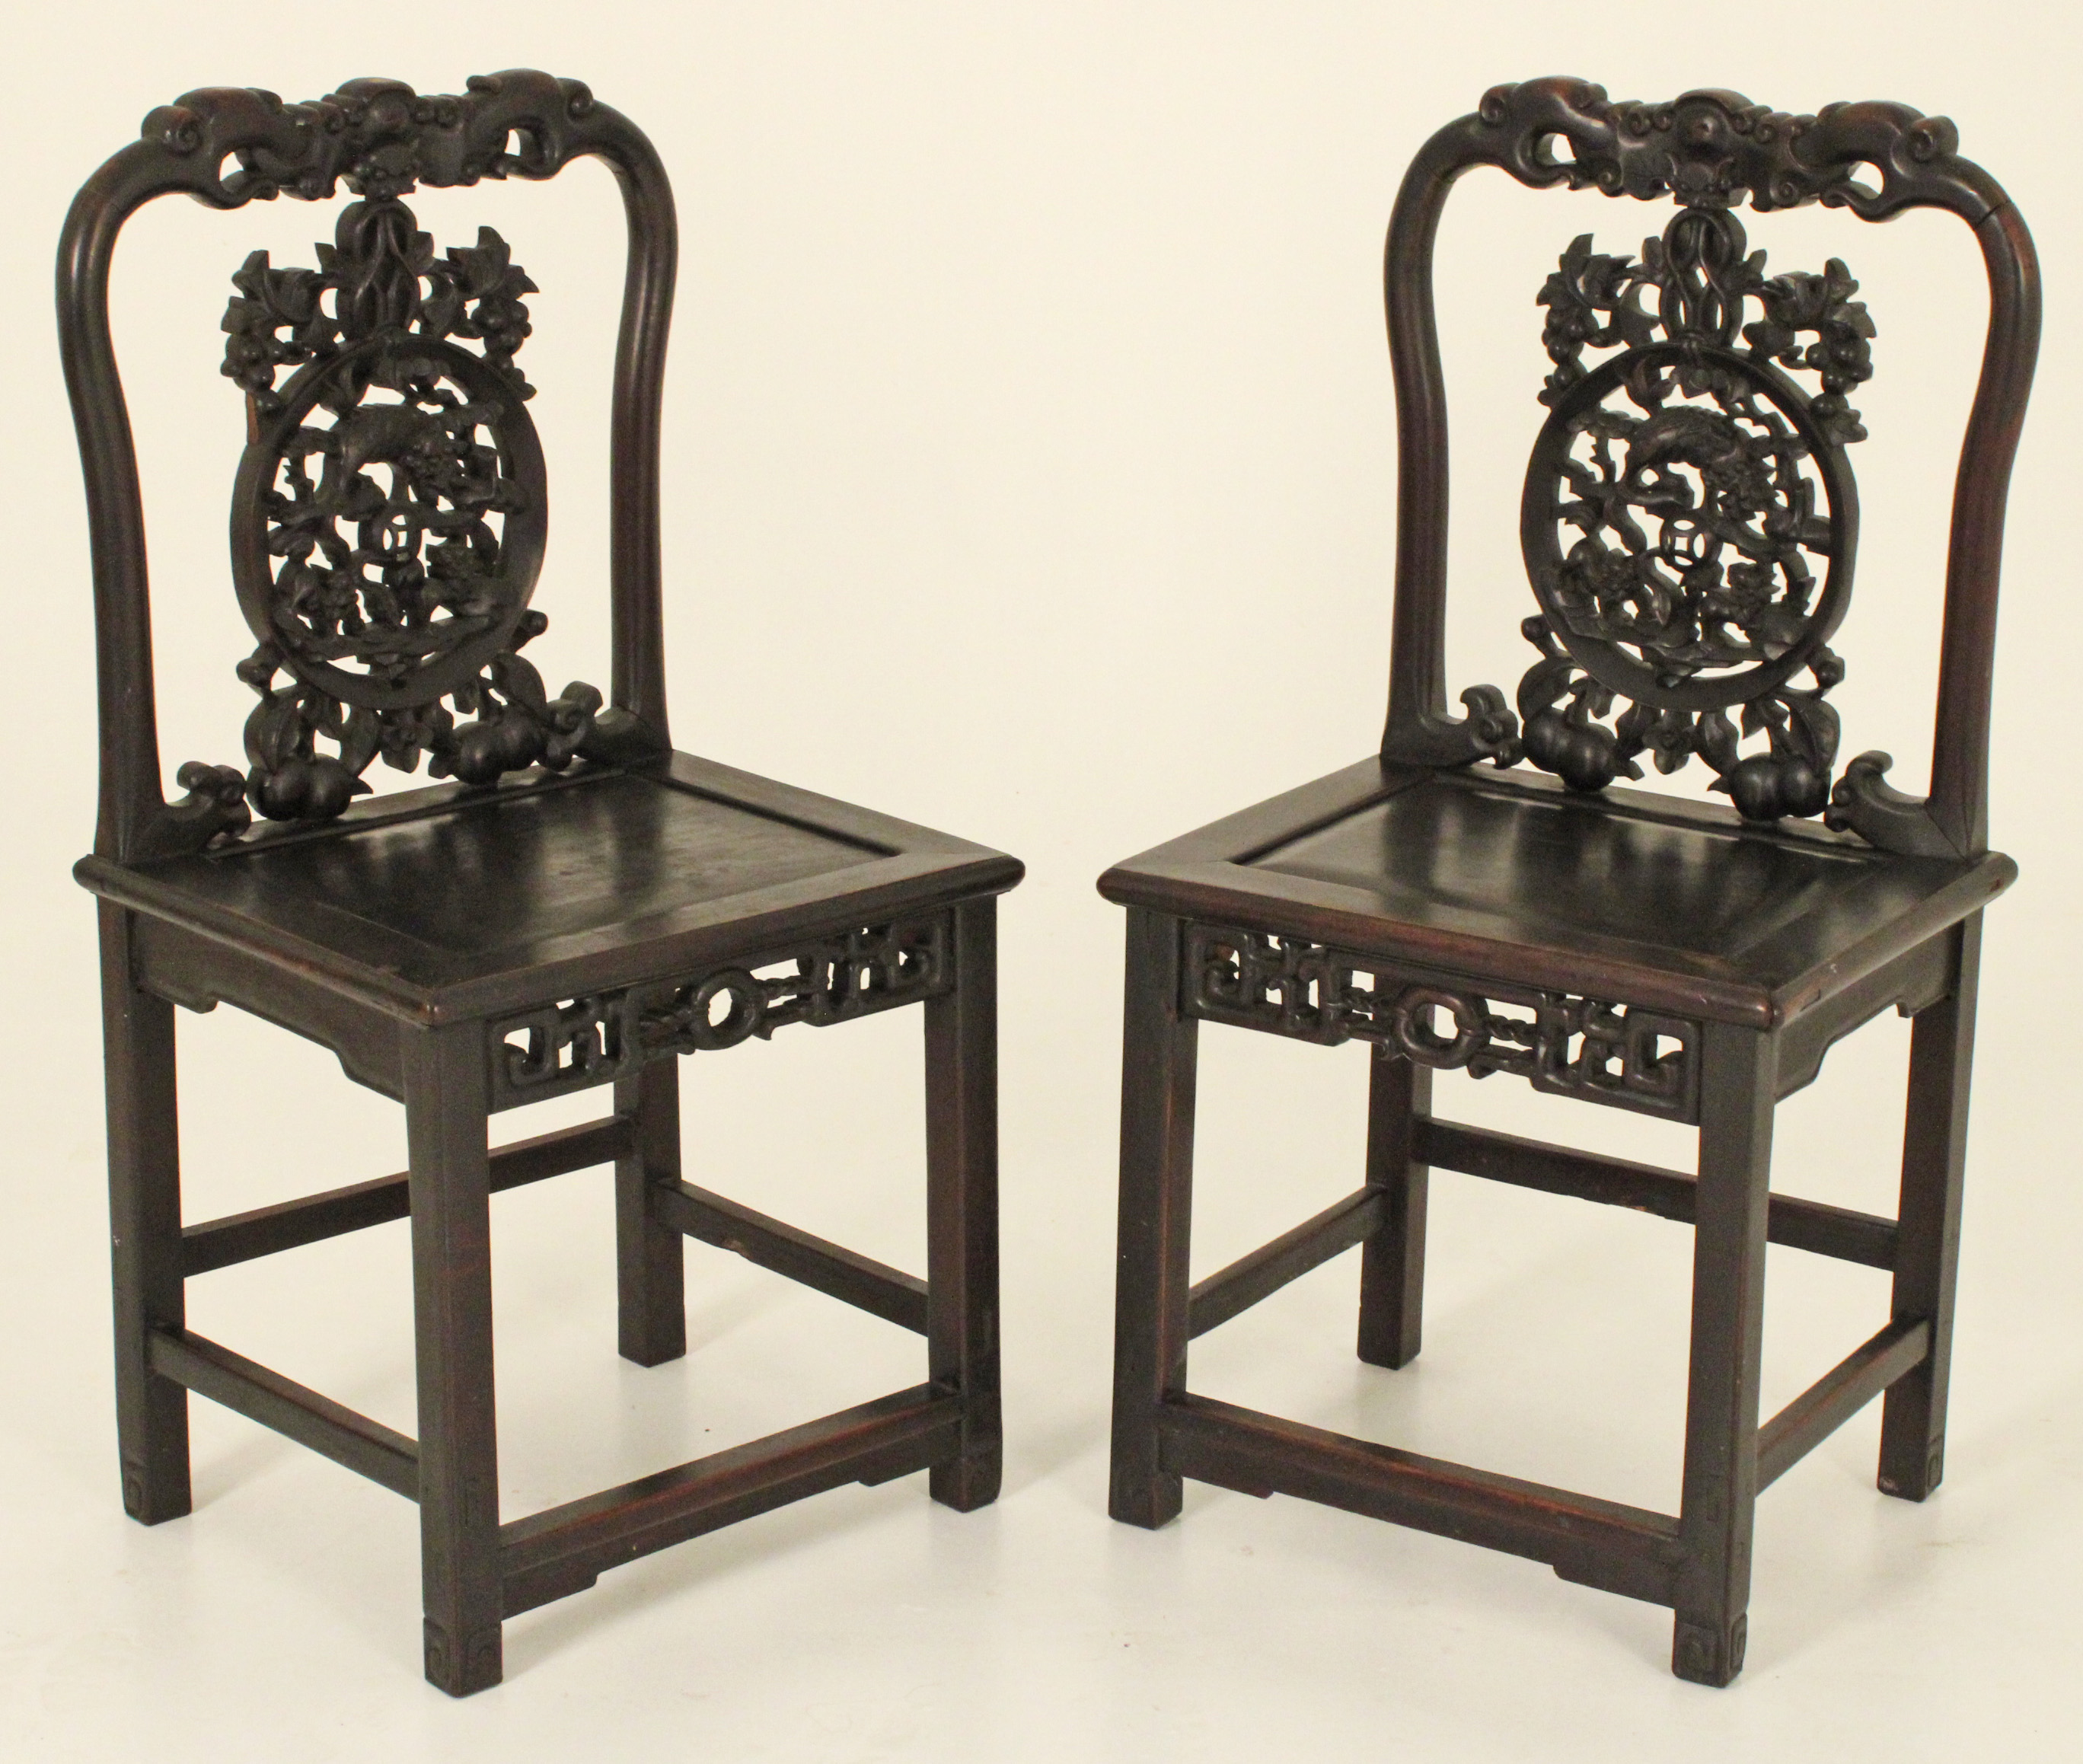 PR OF CHINESE CARVED TEAKWOOD COURT 35f3bf